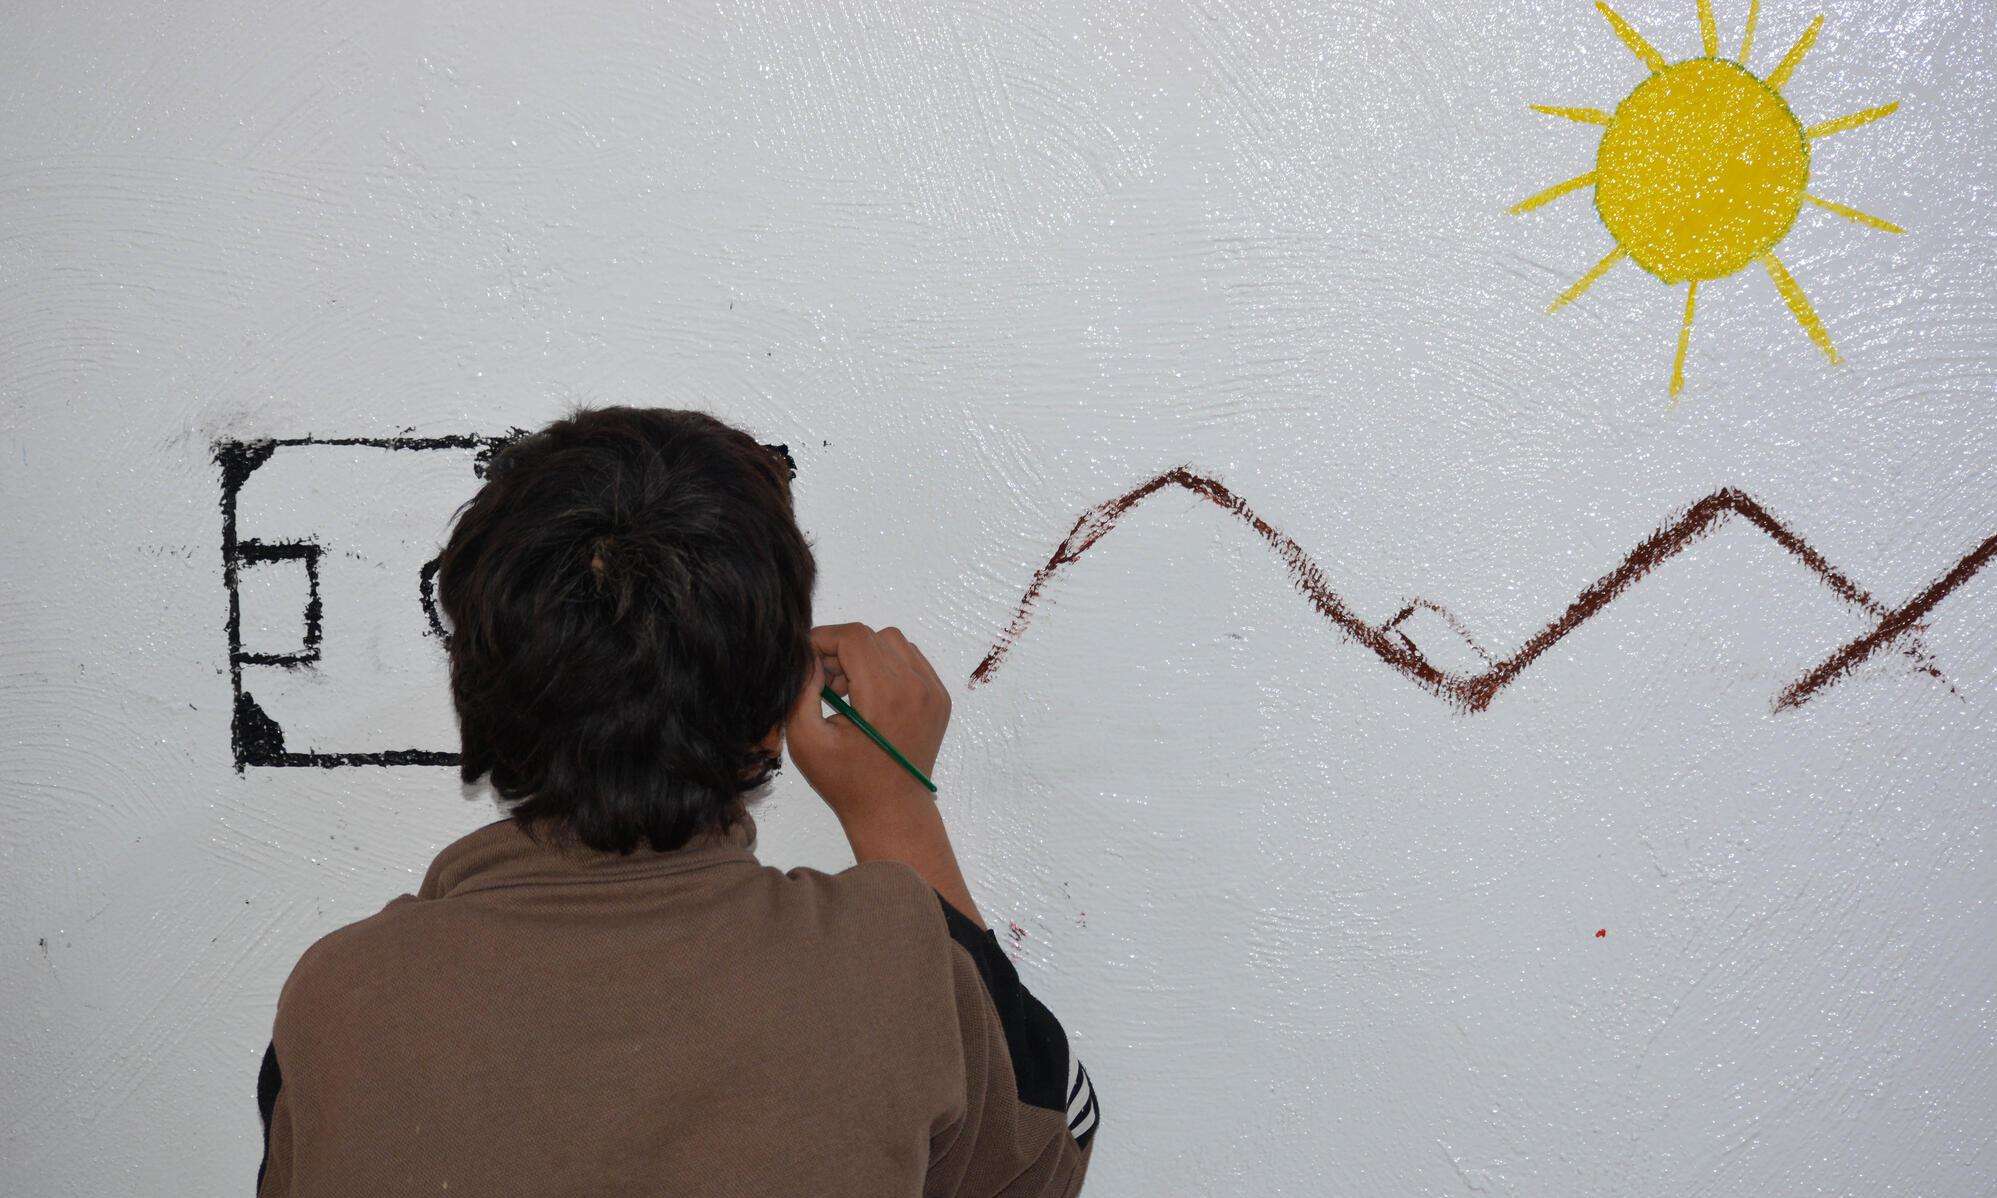 A child draws a sun and mountains on the wall during an art therapy session in Al-Hol camp, northeast Syria.